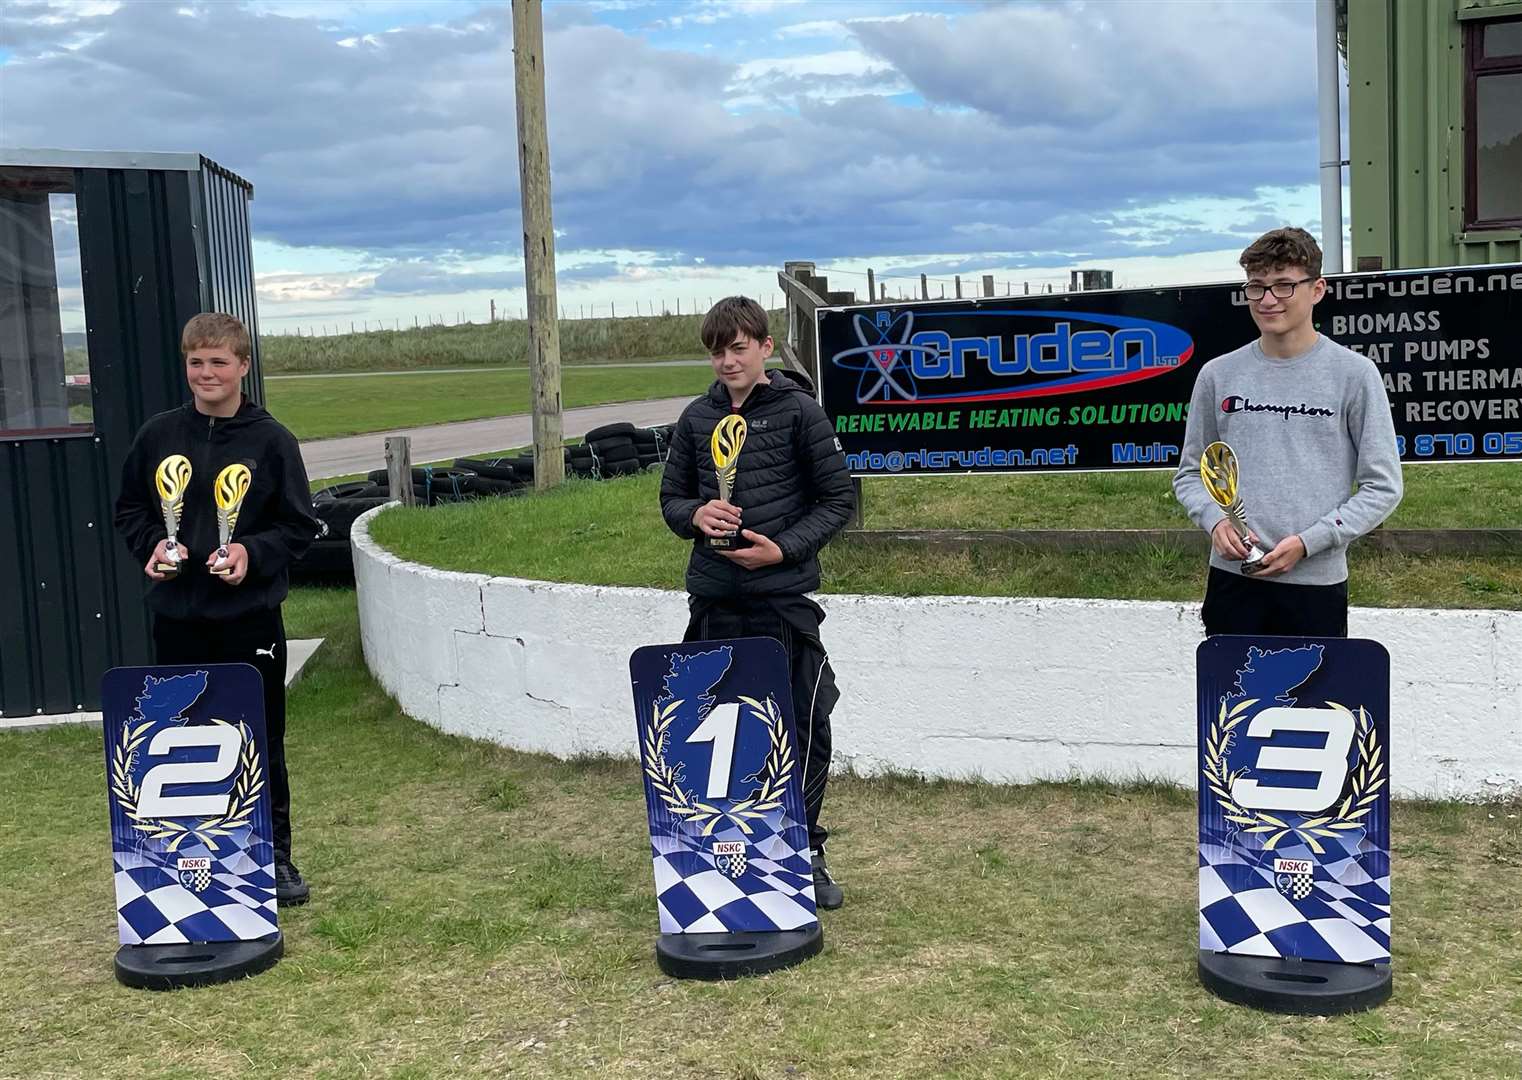 Jack won the Junior Max section ahead of Craig Stephen in second place and Reece Duthie in third.